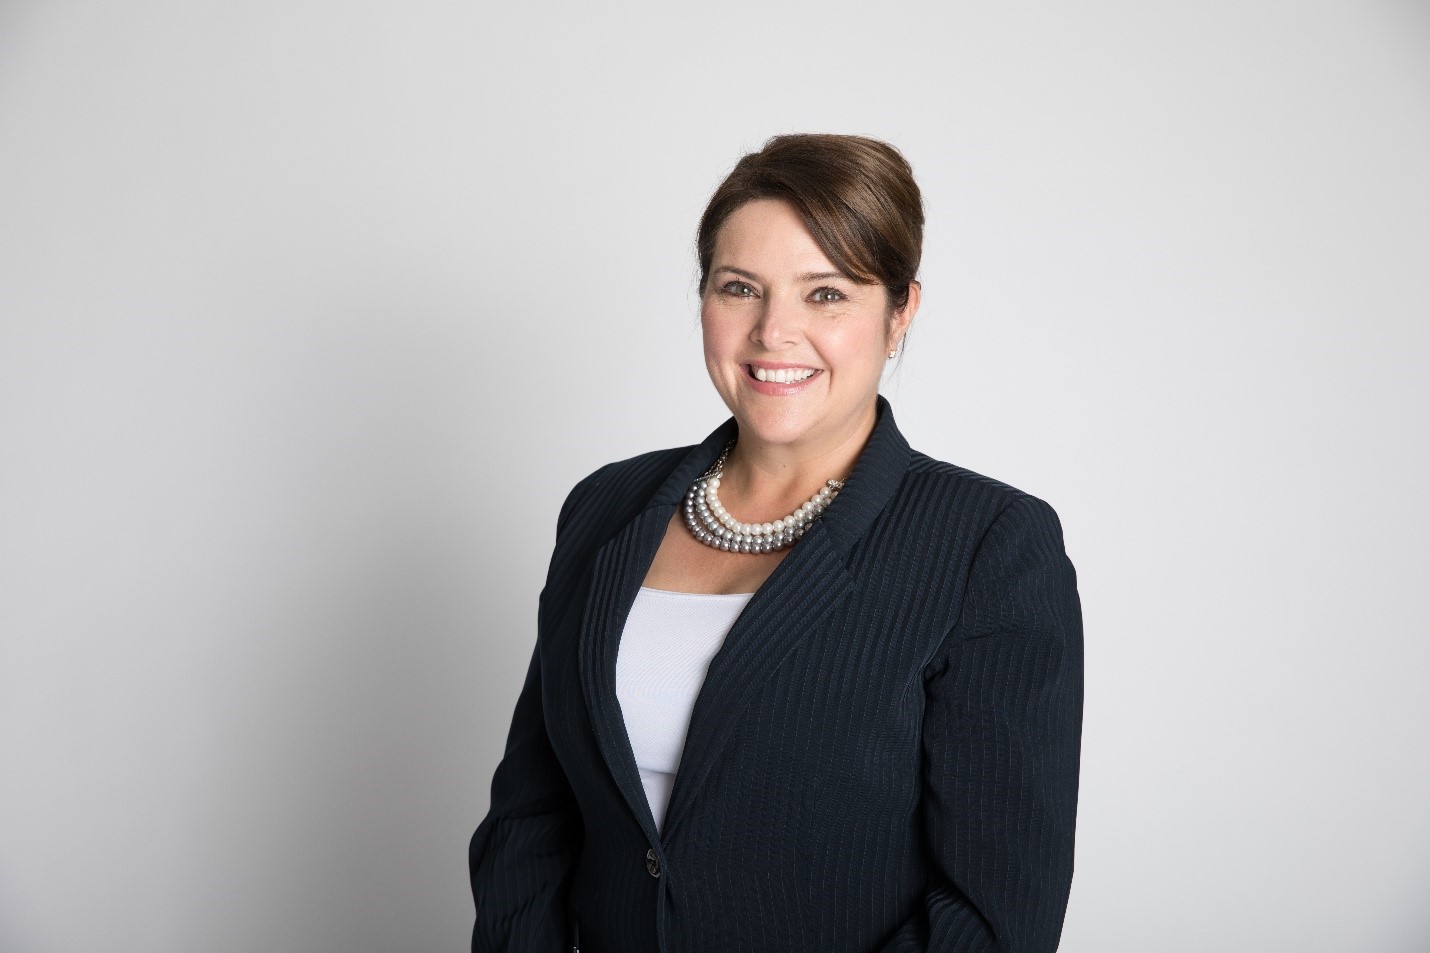 Jennifer Sheets Announced as President and Chief Executive Officer of CBI and Interim HealthCare Inc.